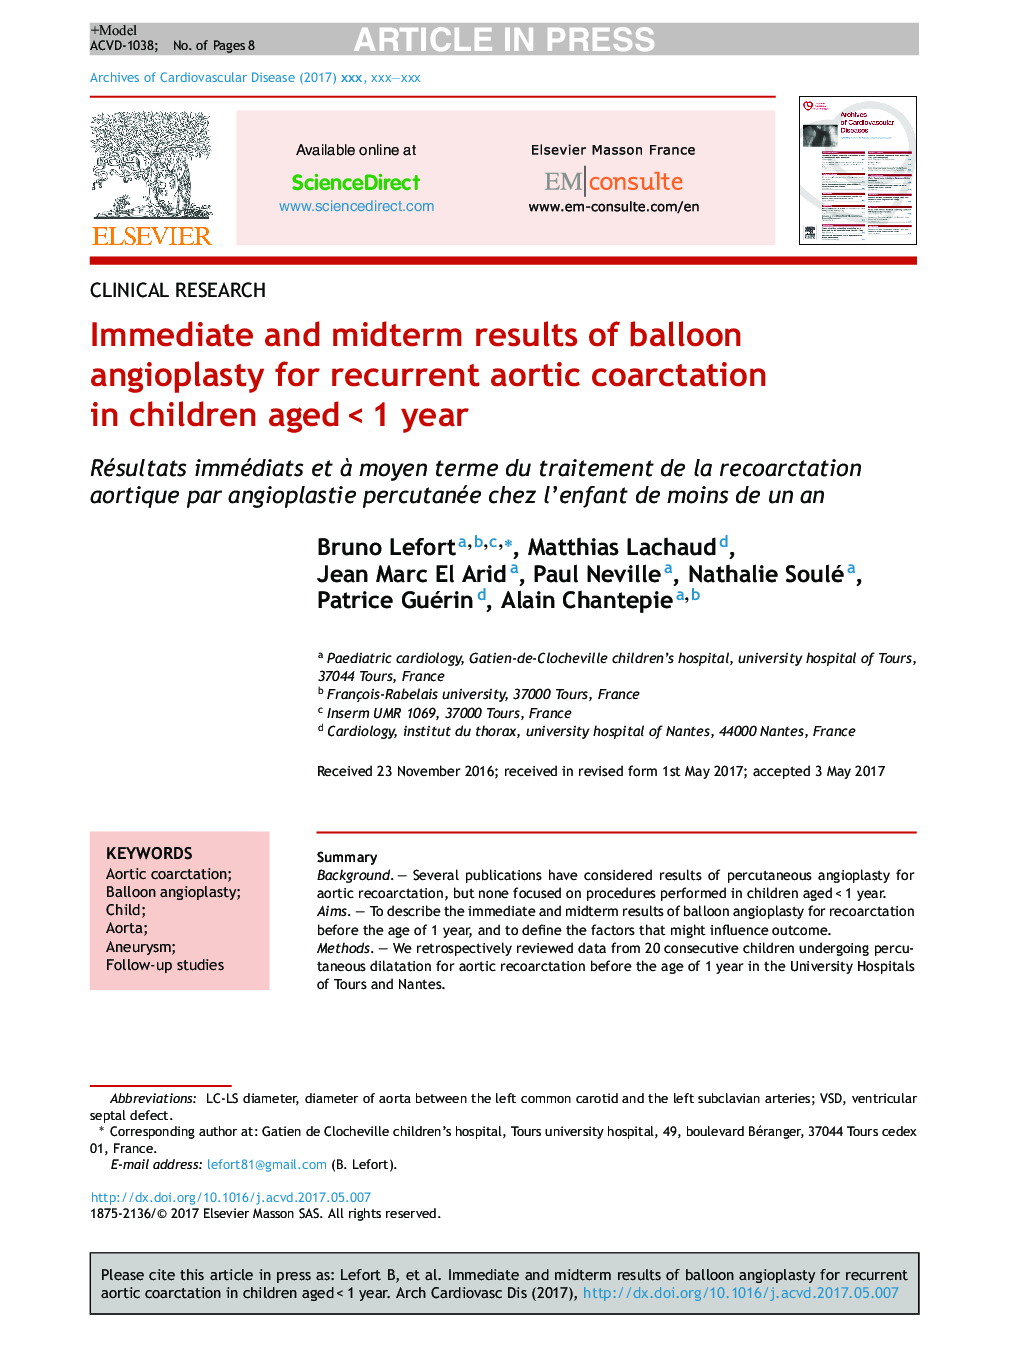 Immediate and midterm results of balloon angioplasty for recurrent aortic coarctation in children agedÂ <Â 1 year